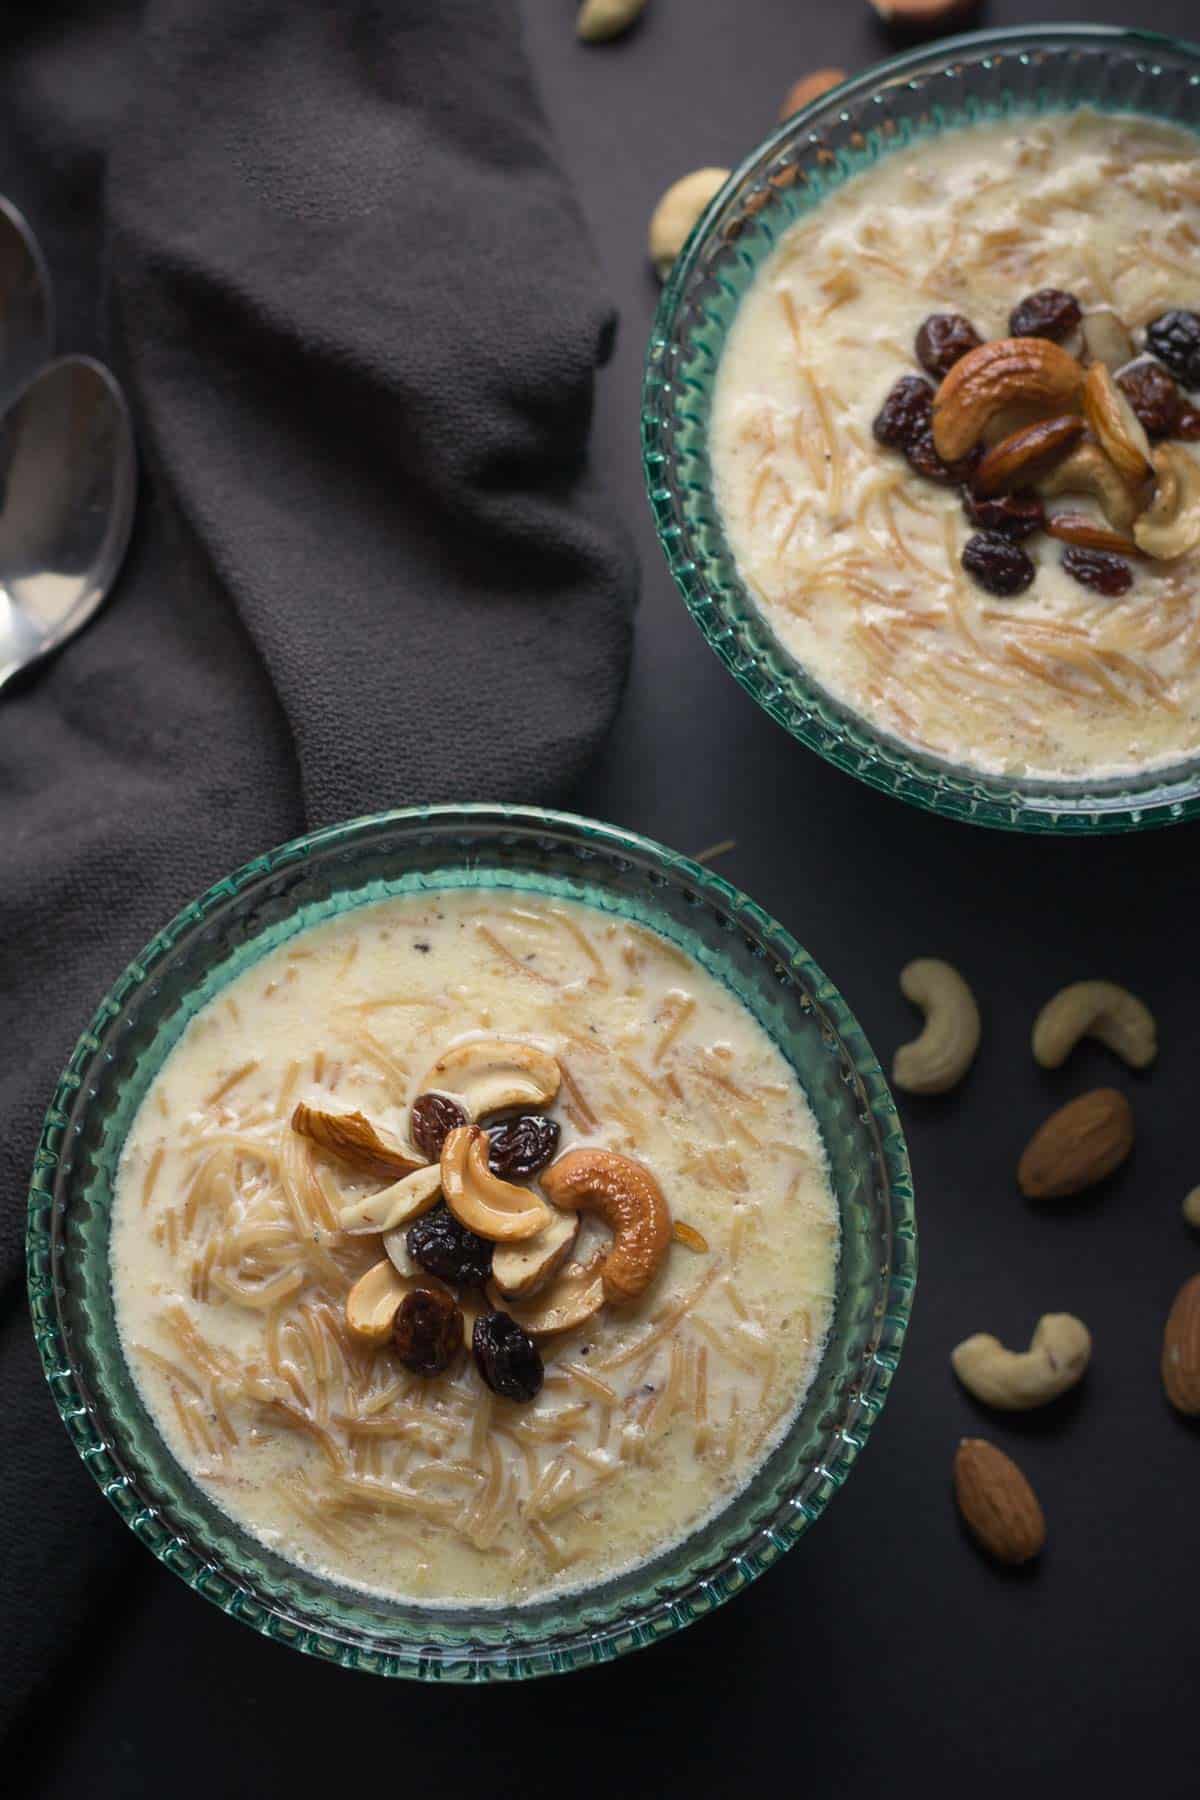 Seviyan kheer or Semiyan payasam is a creamy and delicious dessert that you can put together in a cinch.